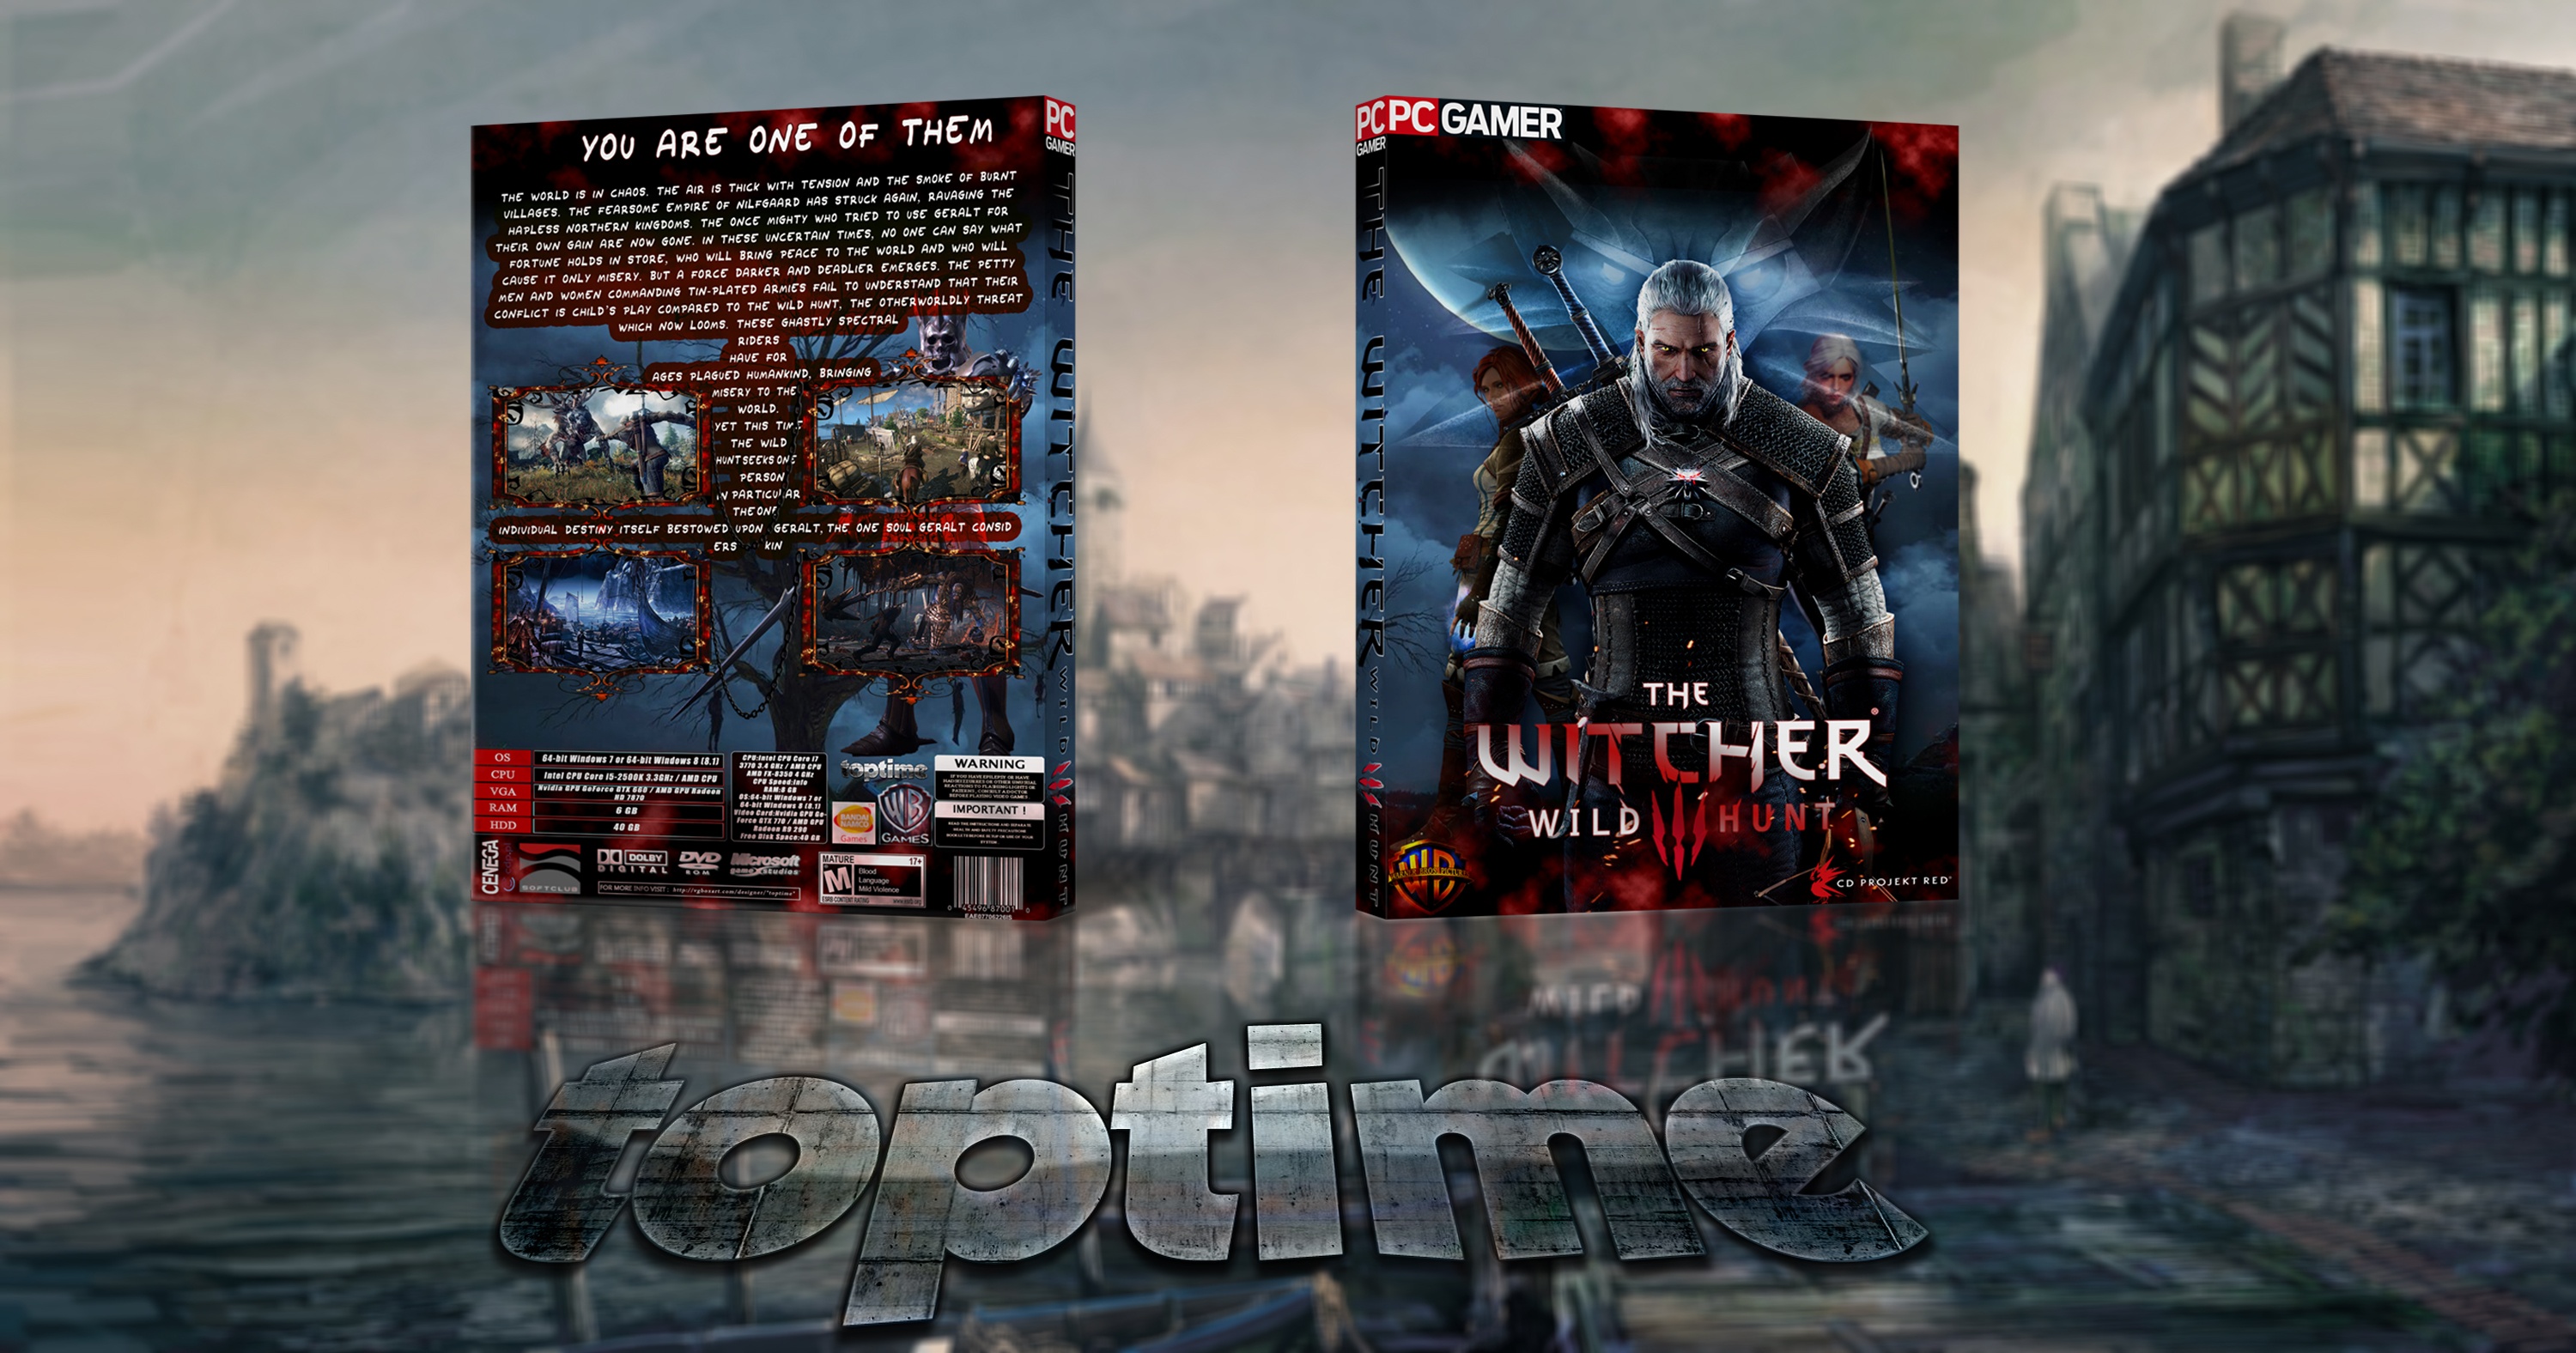 The Witcher 3: Wild Hunt box cover